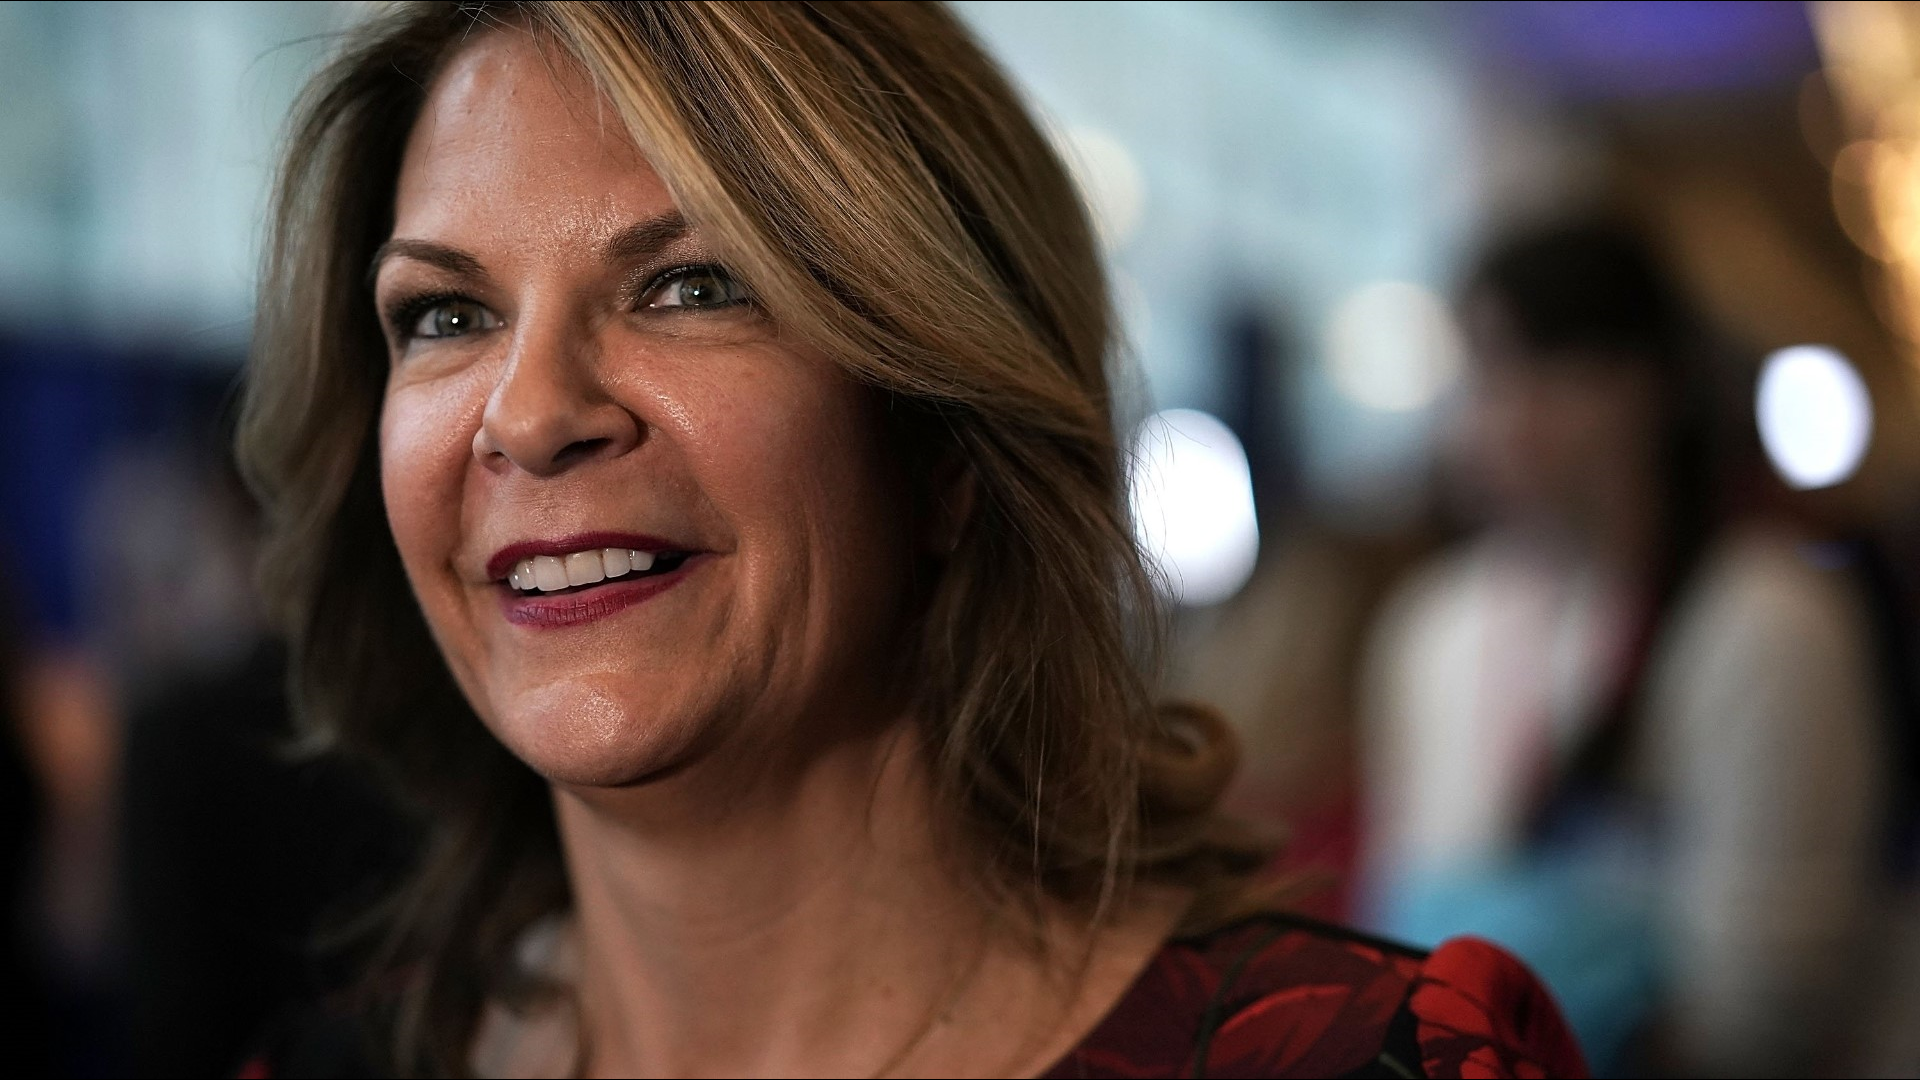 Arizona's leader of the Republican Party, Kelli Ward, has been ordered to turn over phone records by the Jan. 6 committee. Ward is fighting the subpoena.